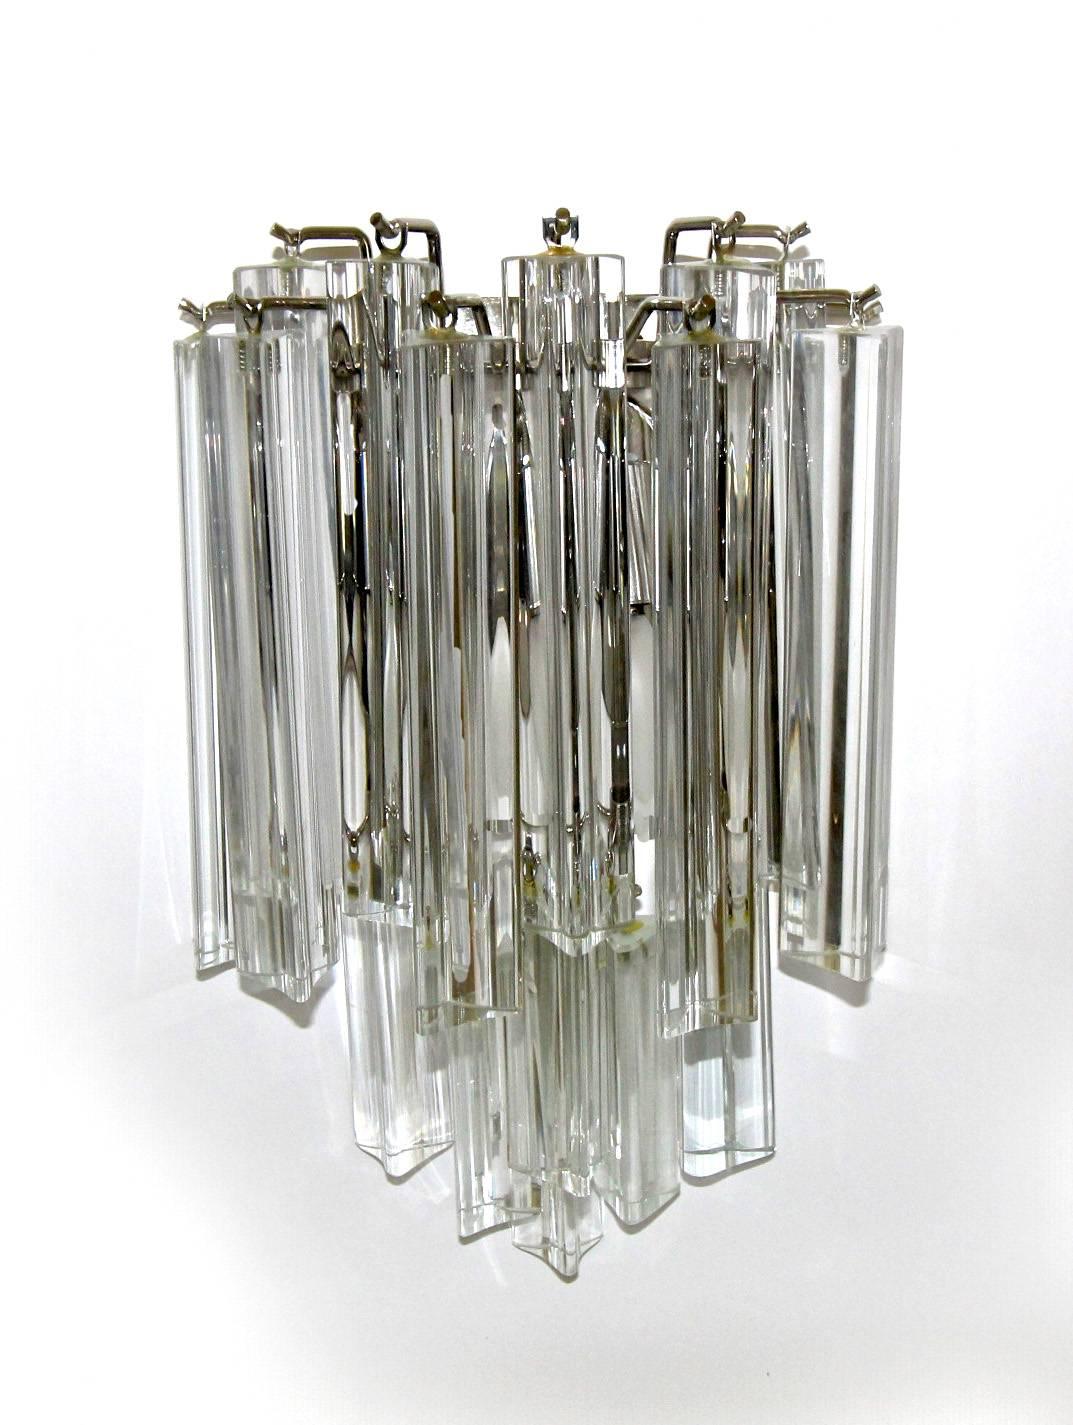 Pair of Venini for Camer glass clear crystal glass Triedri prism wall sconces with chrome-plated back plates. Each sconce uses two candelabra base bulbs. Newly wired.